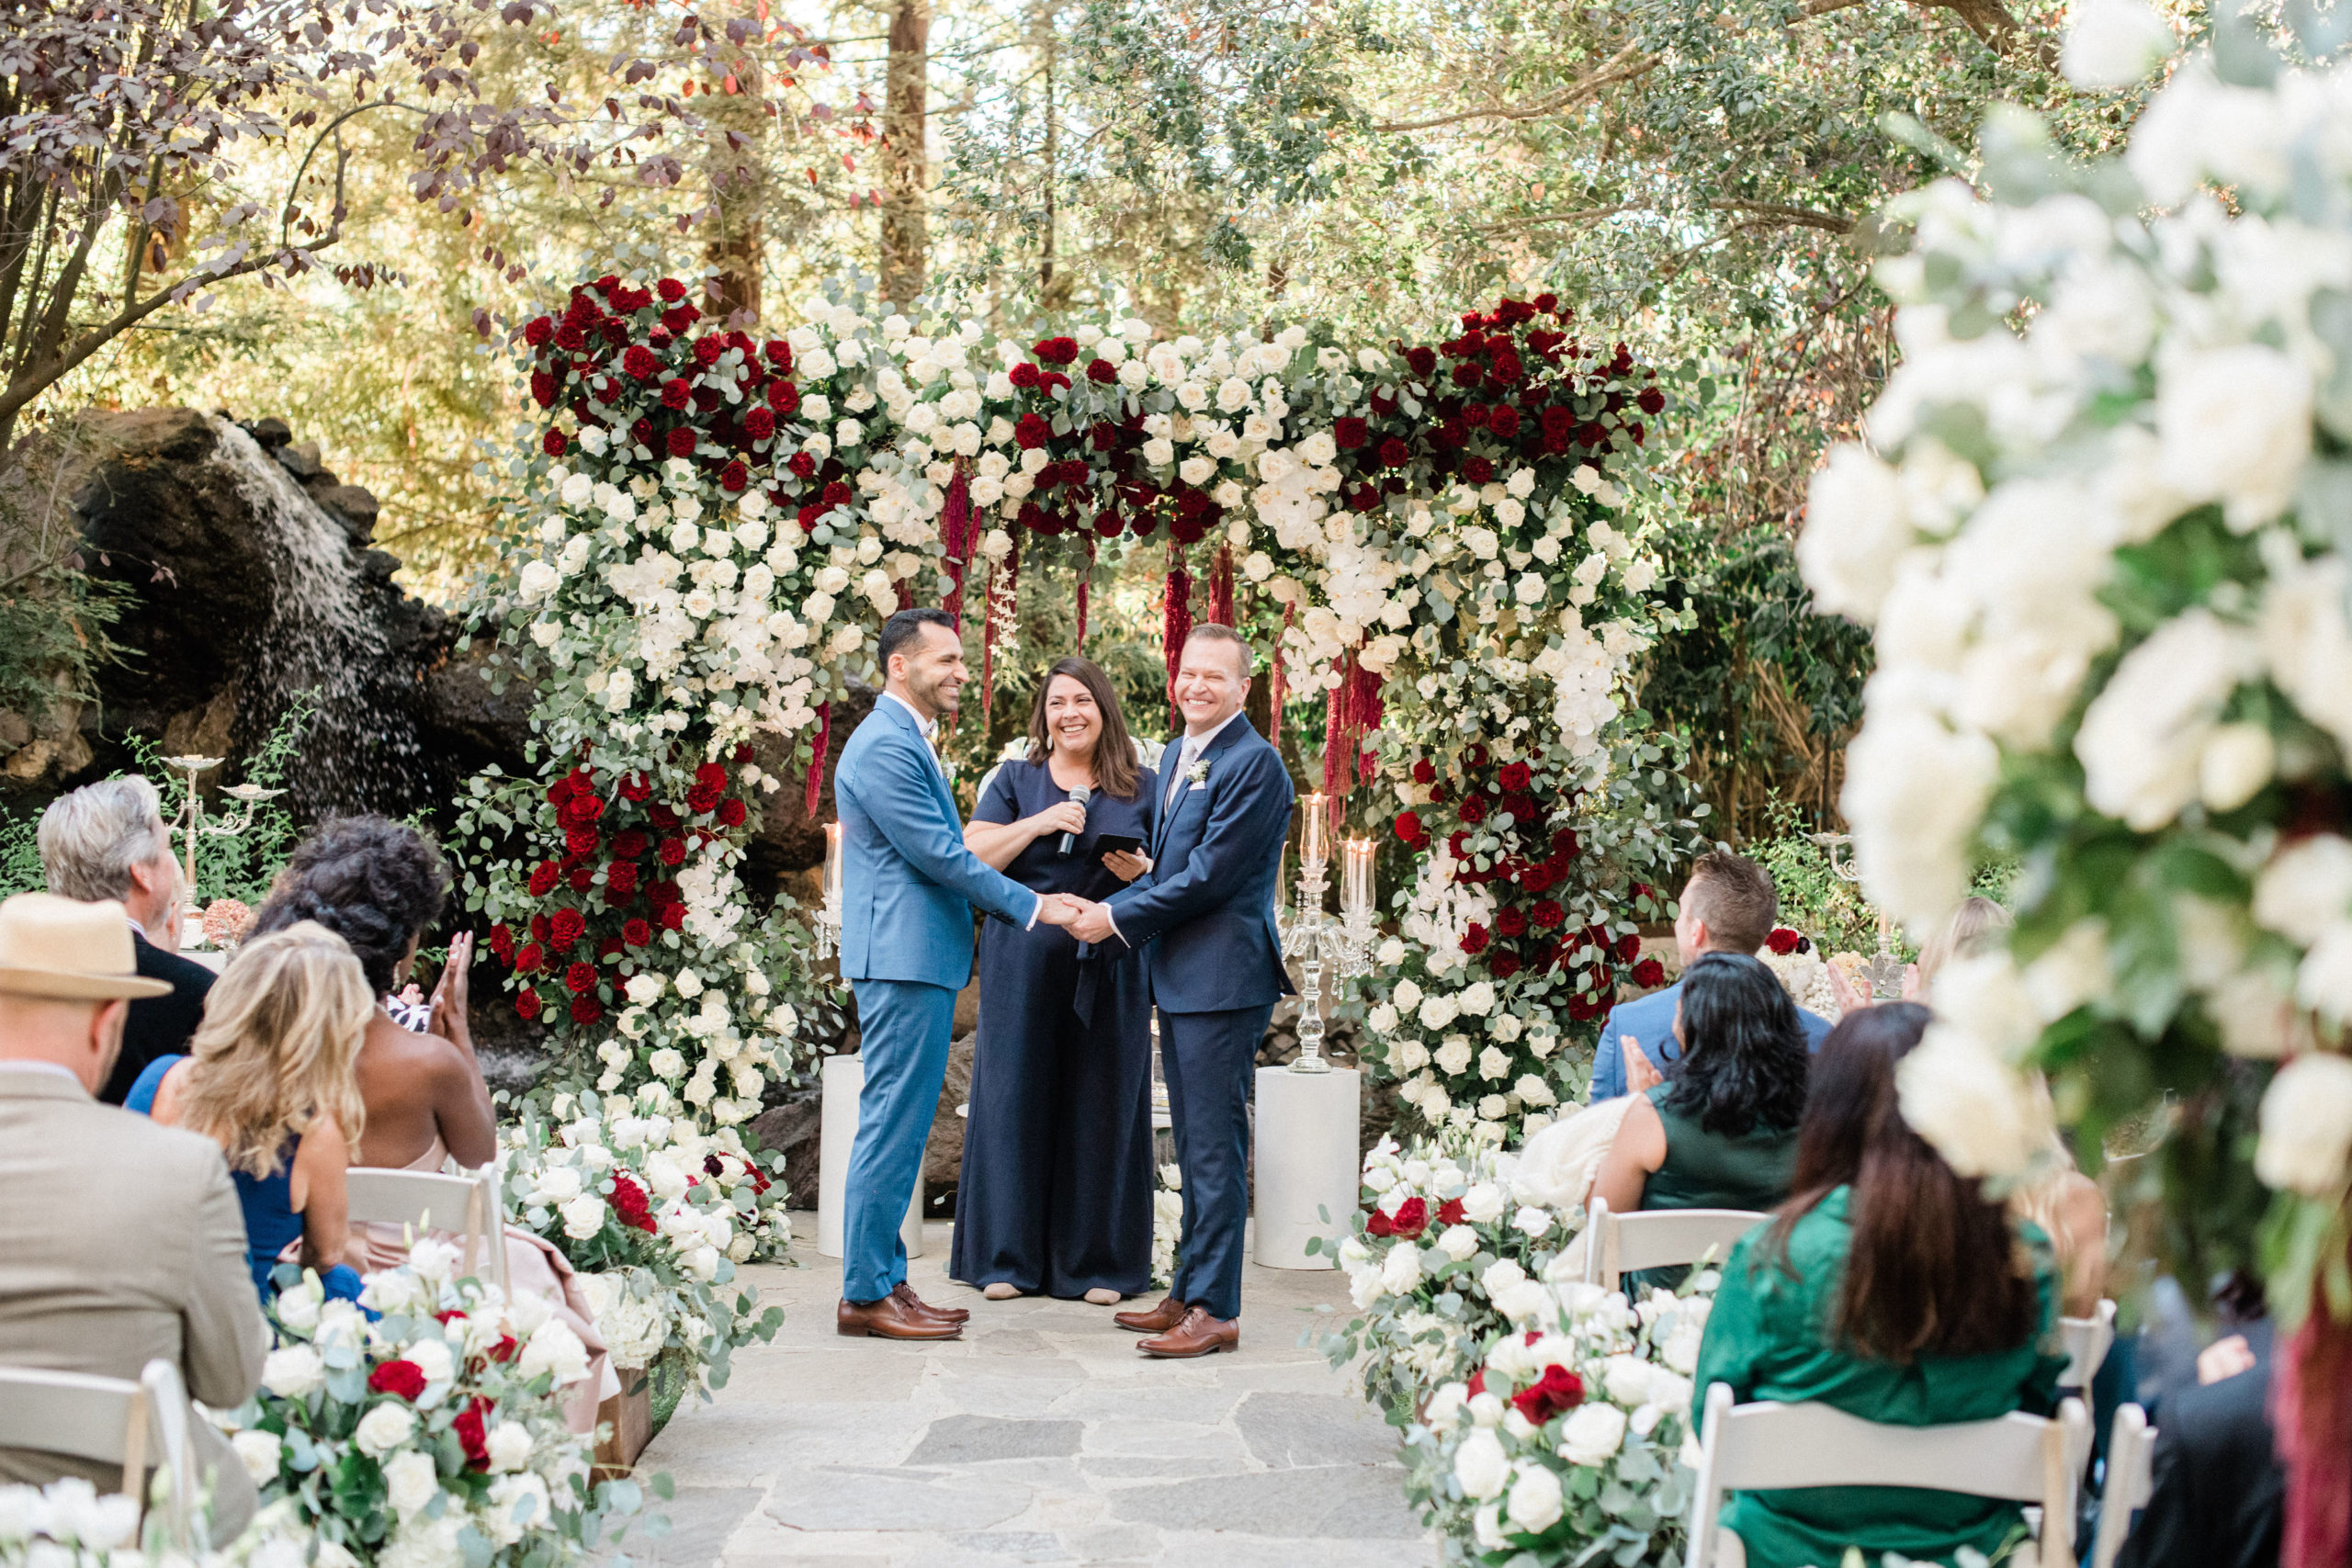 Los Angeles wedding officiant Let's Get Married by Marie